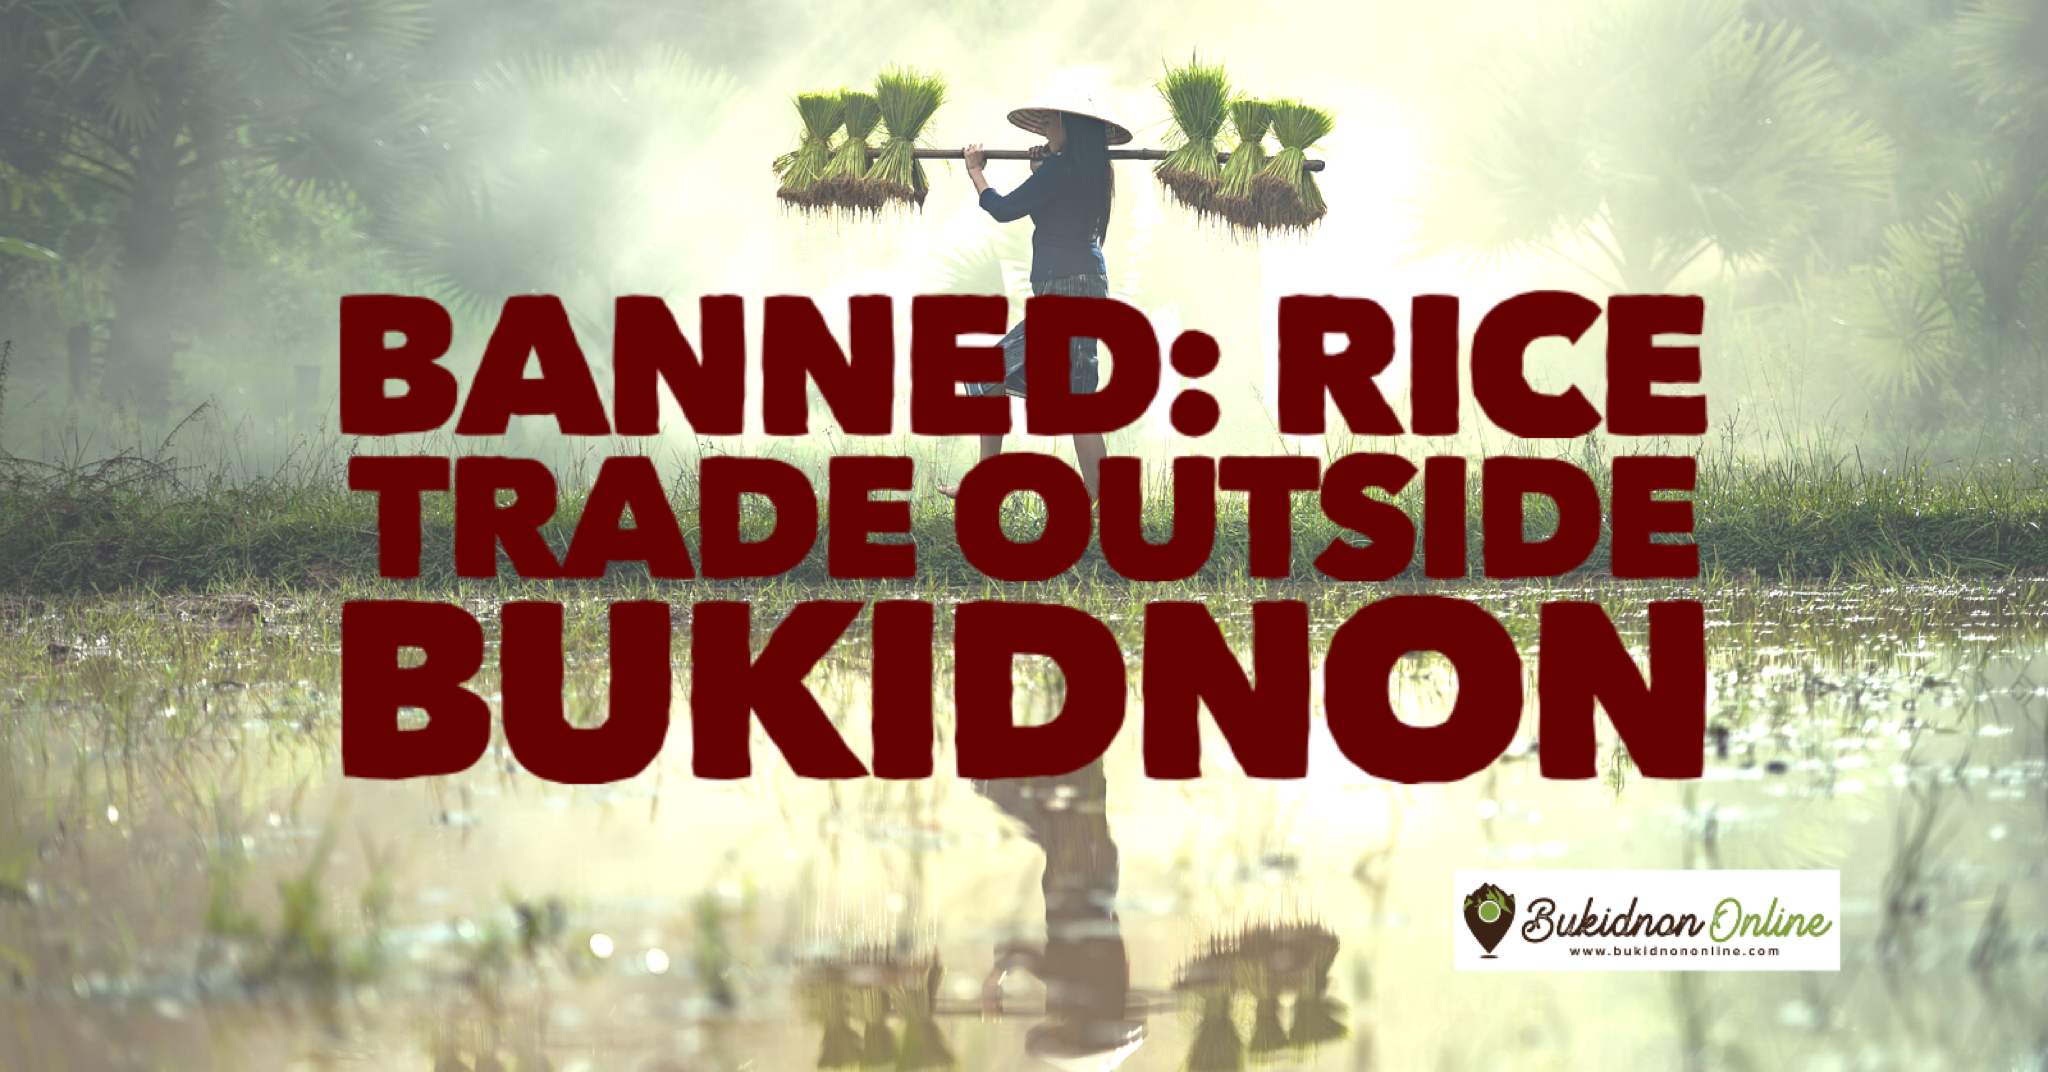 BANNED: Rice trade outside Bukidnon (no selling, no delivering allowed)